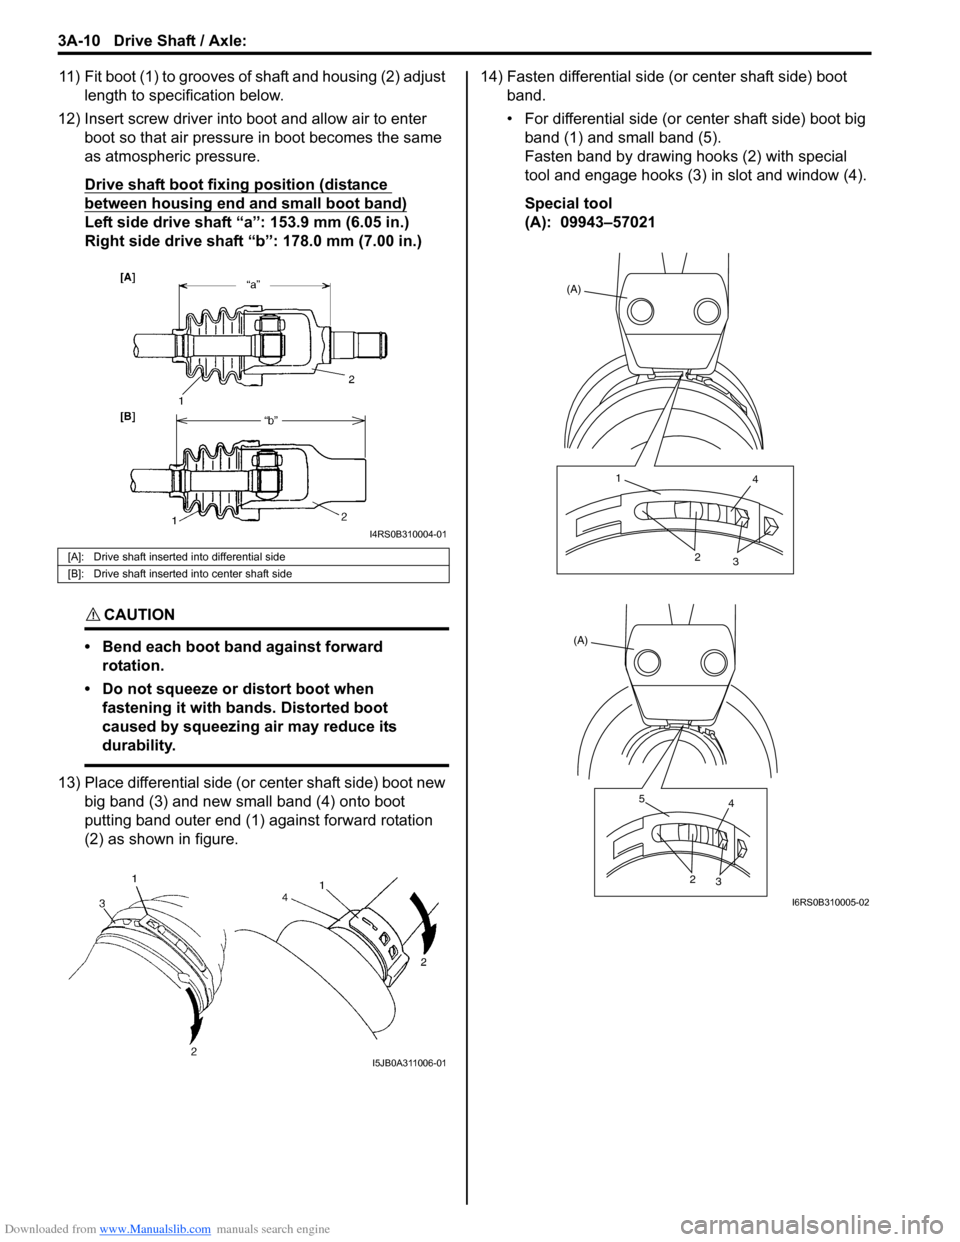 SUZUKI SWIFT 2008 2.G Service Workshop Manual Downloaded from www.Manualslib.com manuals search engine 3A-10 Drive Shaft / Axle: 
11) Fit boot (1) to grooves of shaft and housing (2) adjust 
length to specification below.
12) Insert screw driver 